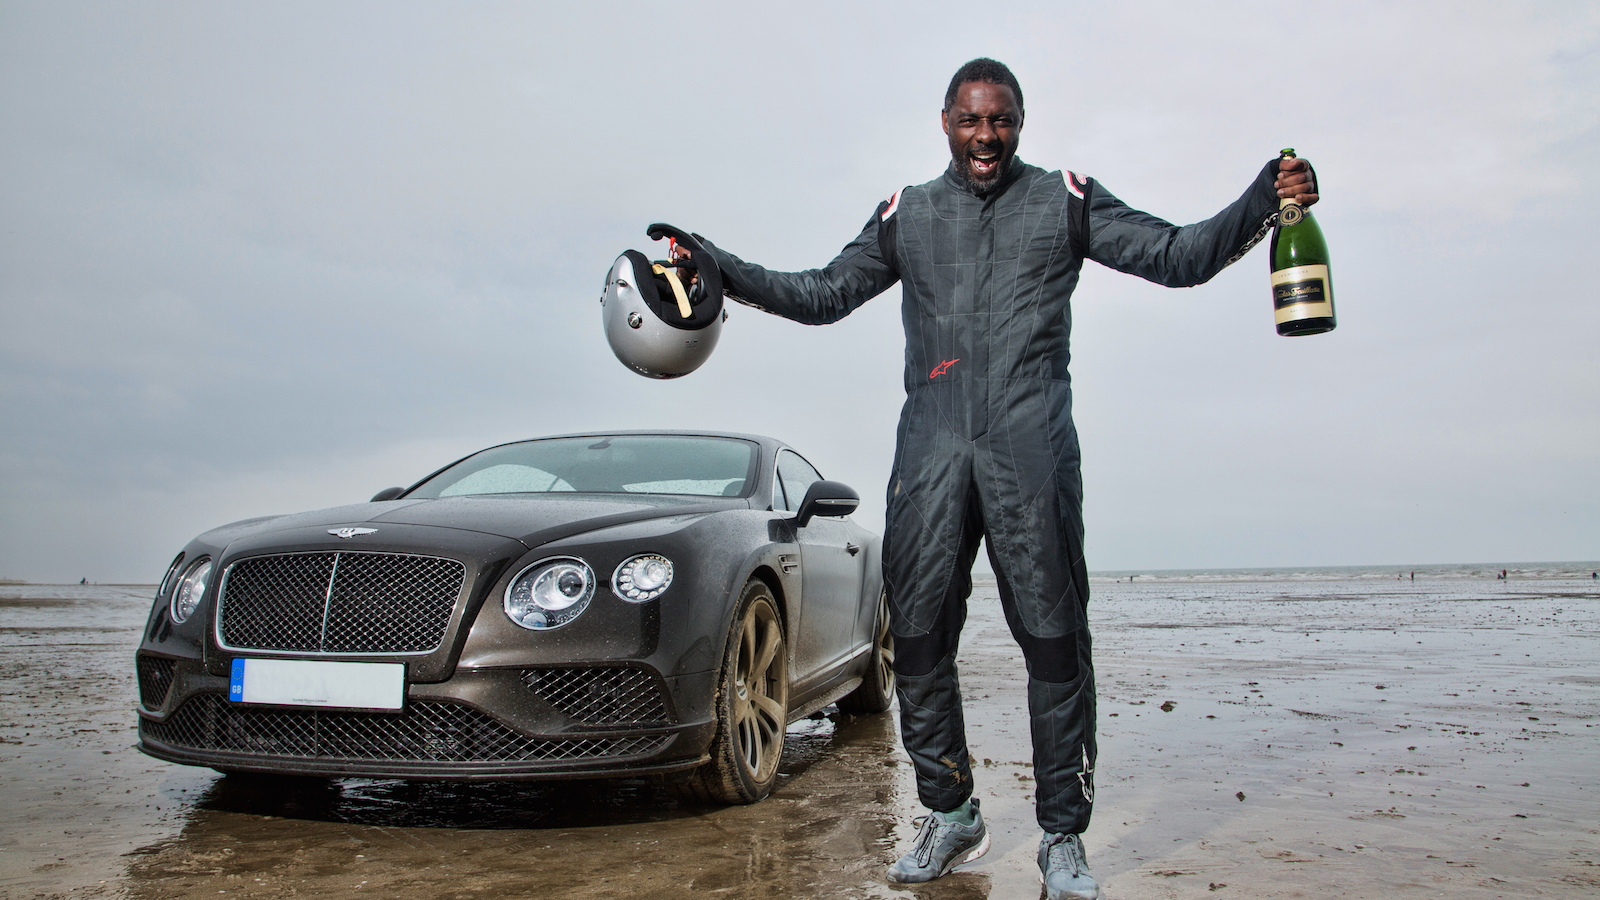 Idris Elba sets new Flying Mile UK land speed record in Bentley Continental GT